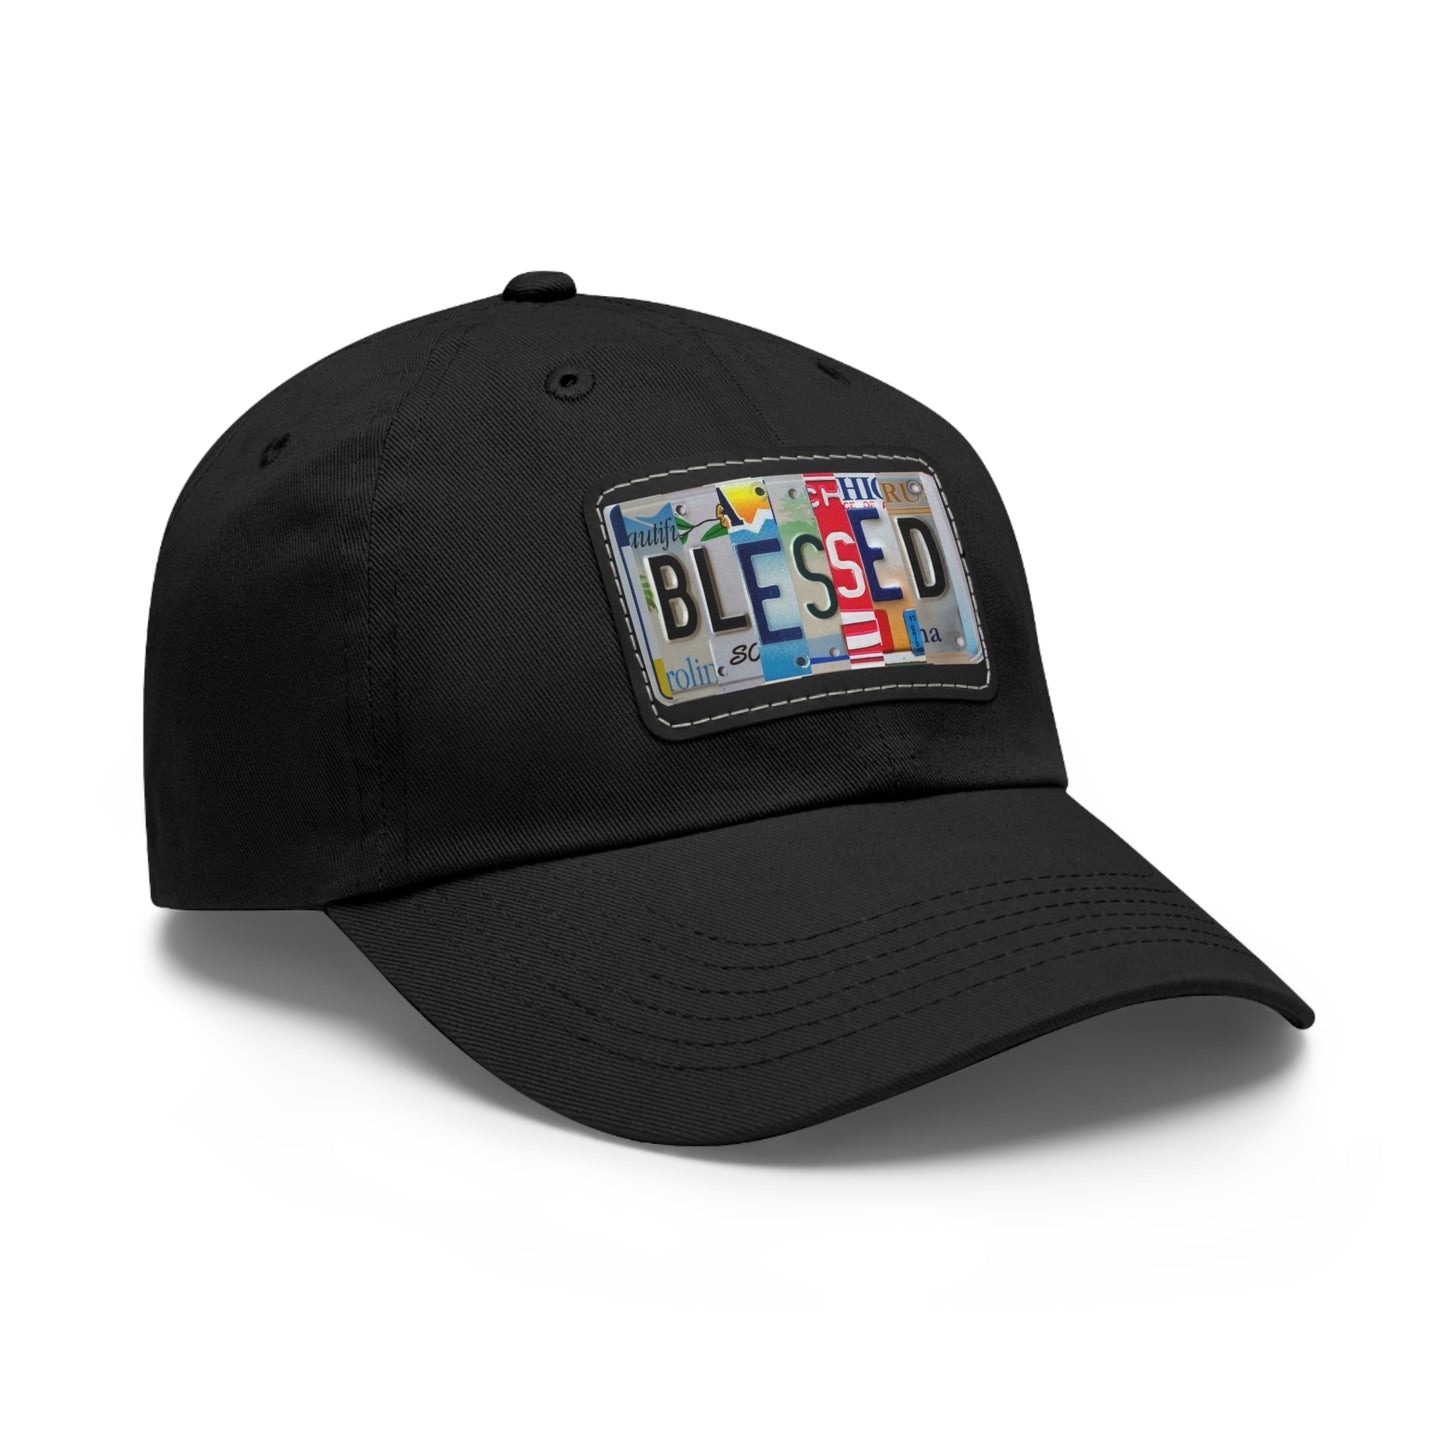 Inspirational 'Blessed' Dad Hat with Rectangular Leather Patch